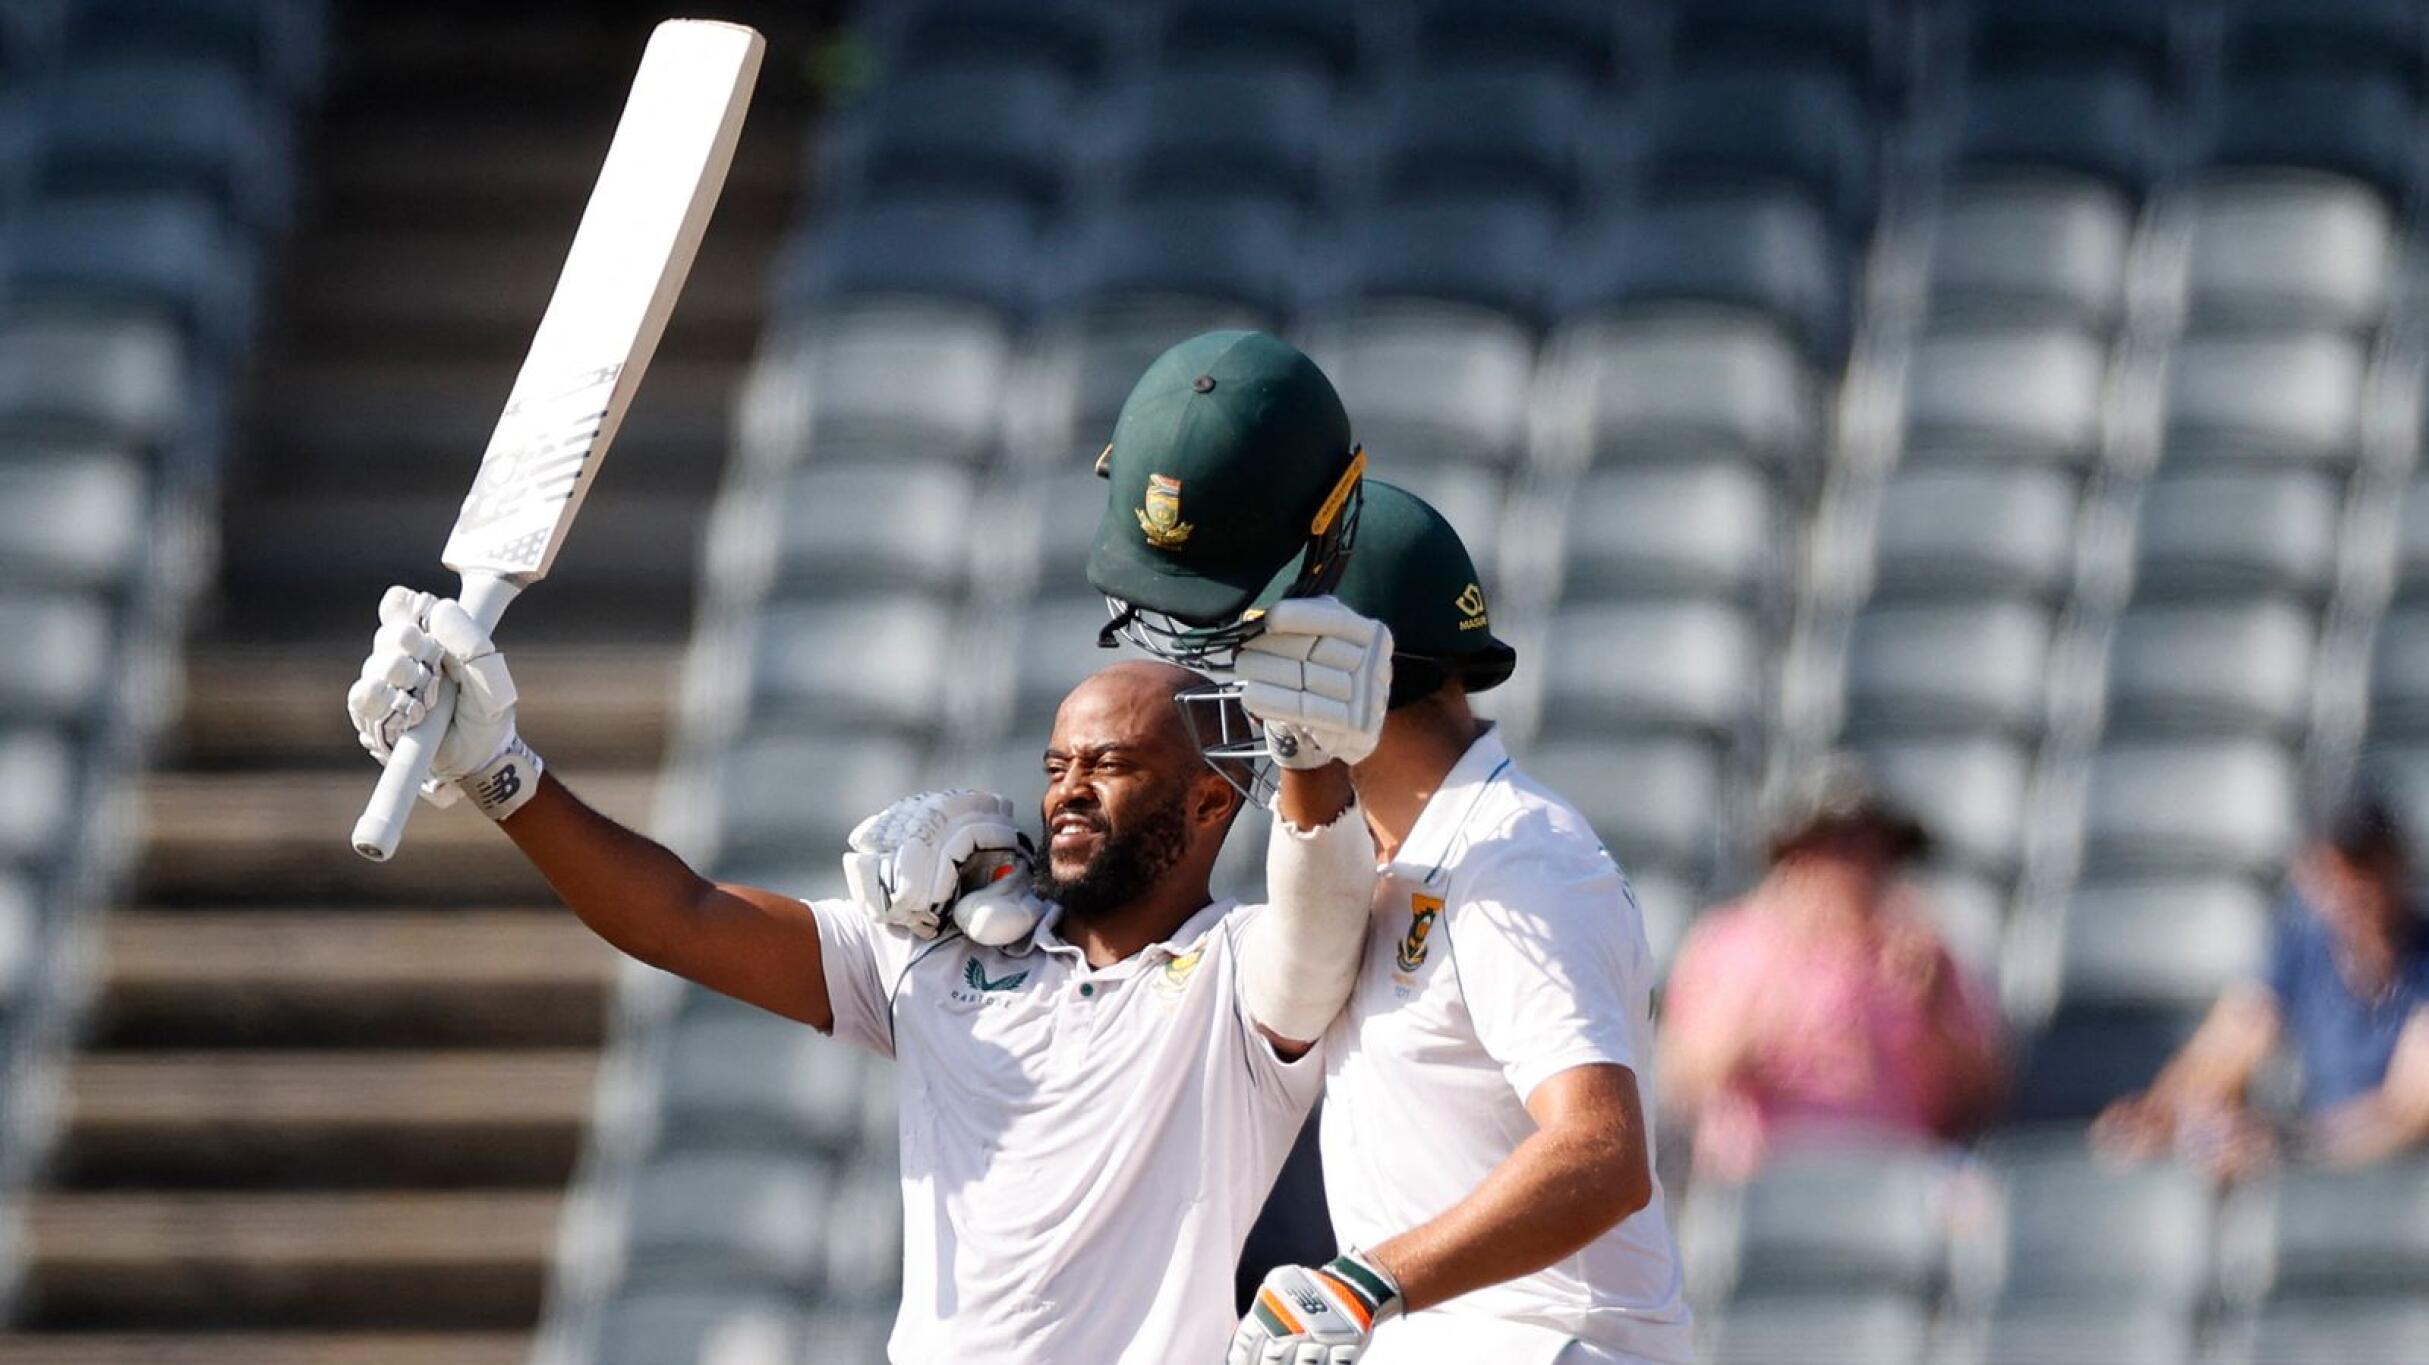 South Africa's Temba Bavuma celebrates with Wiaan Mulder after scoring a century during the third day of the second Test against the West Indies at The Wanderers Stadium in Johannesburg on Friday